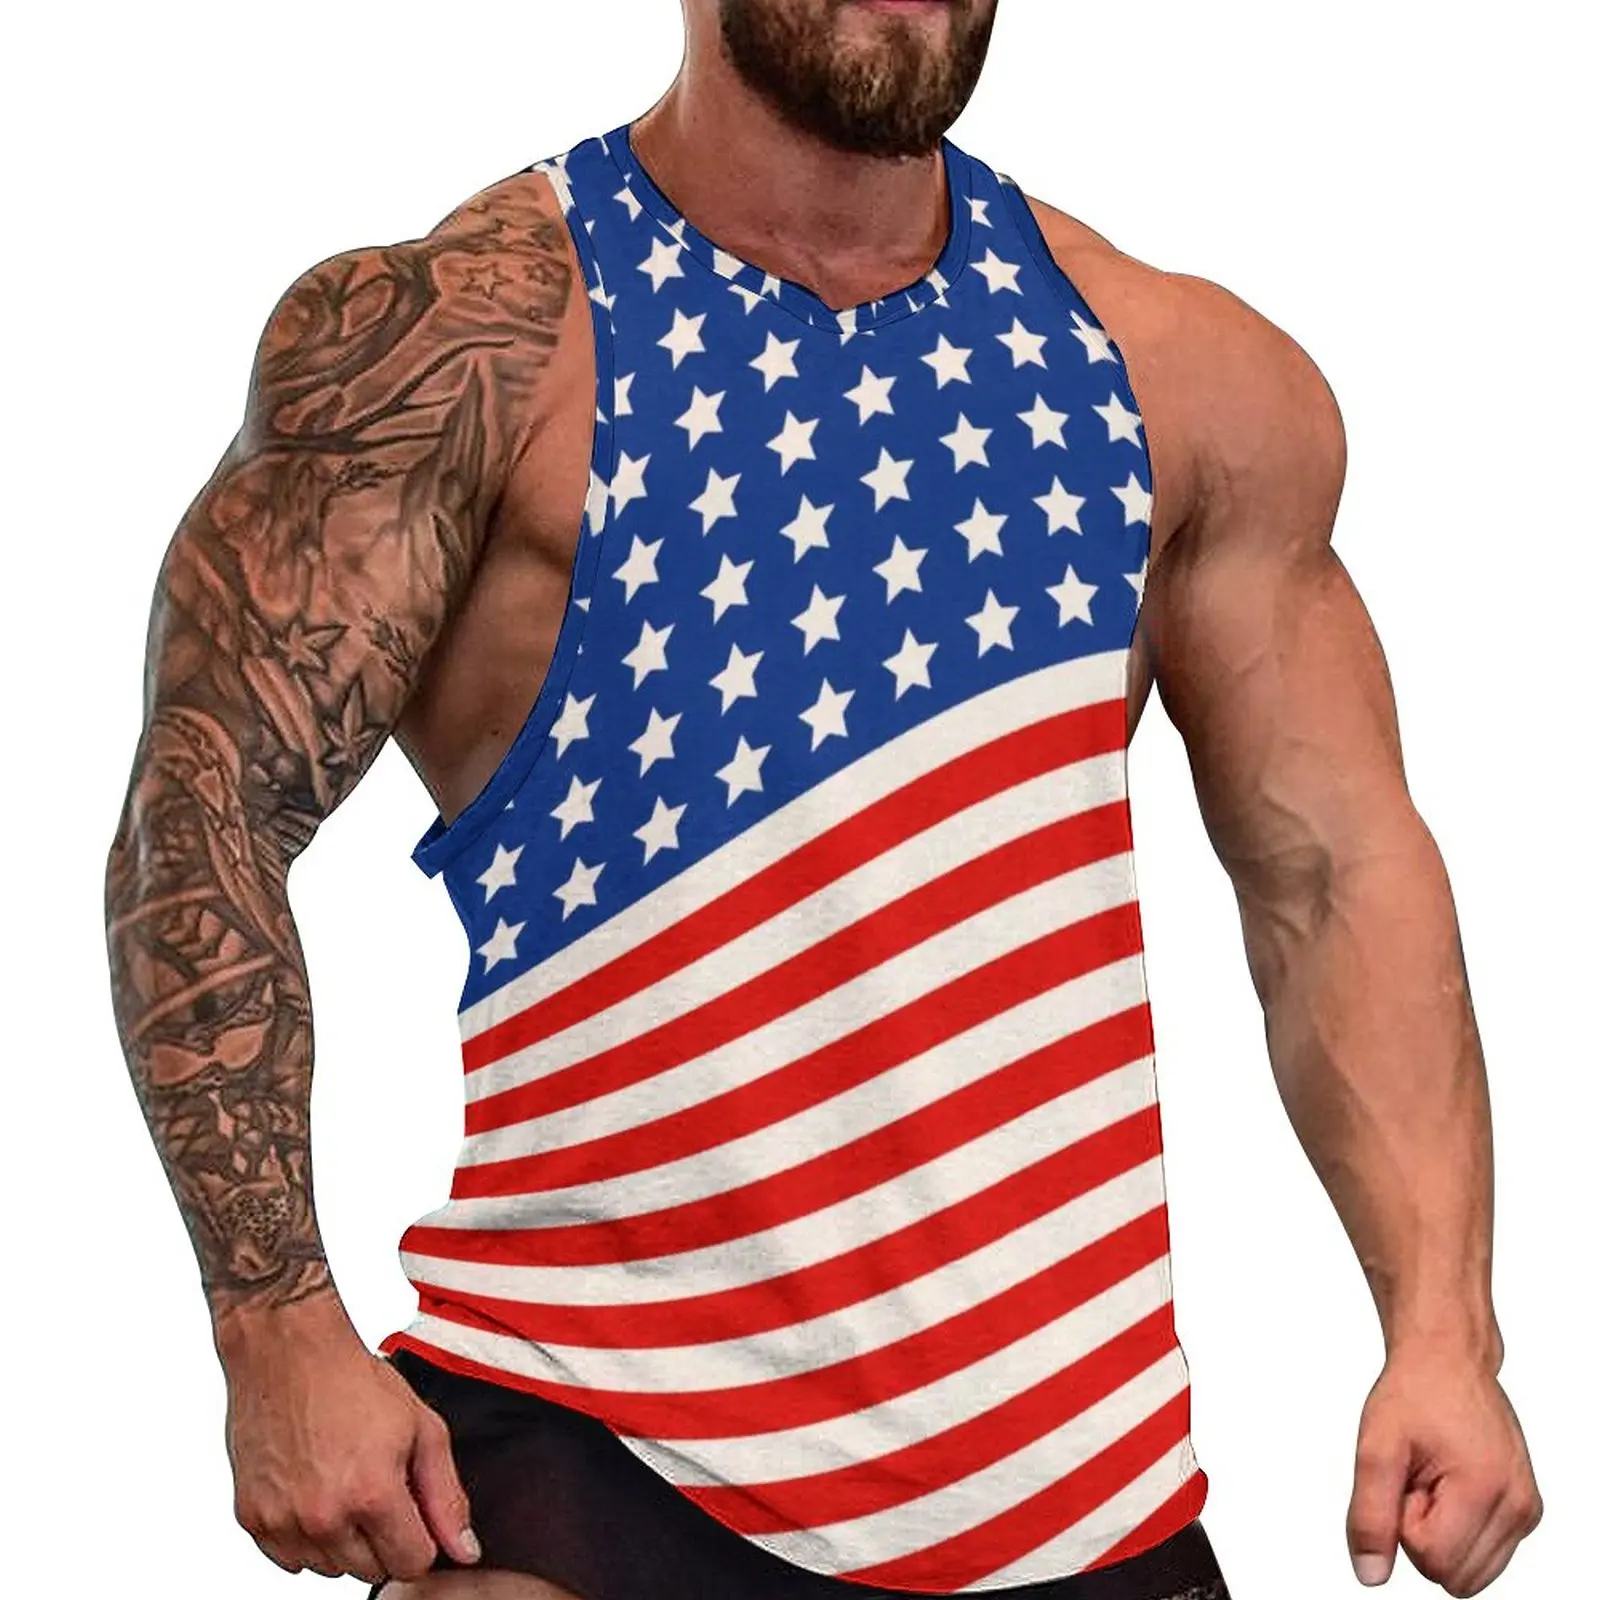 

American Flag Print Summer Tank Top Stars and Stripes 4th of July Bodybuilding Tops Men Pattern Cool Sleeveless Vests Plus Size